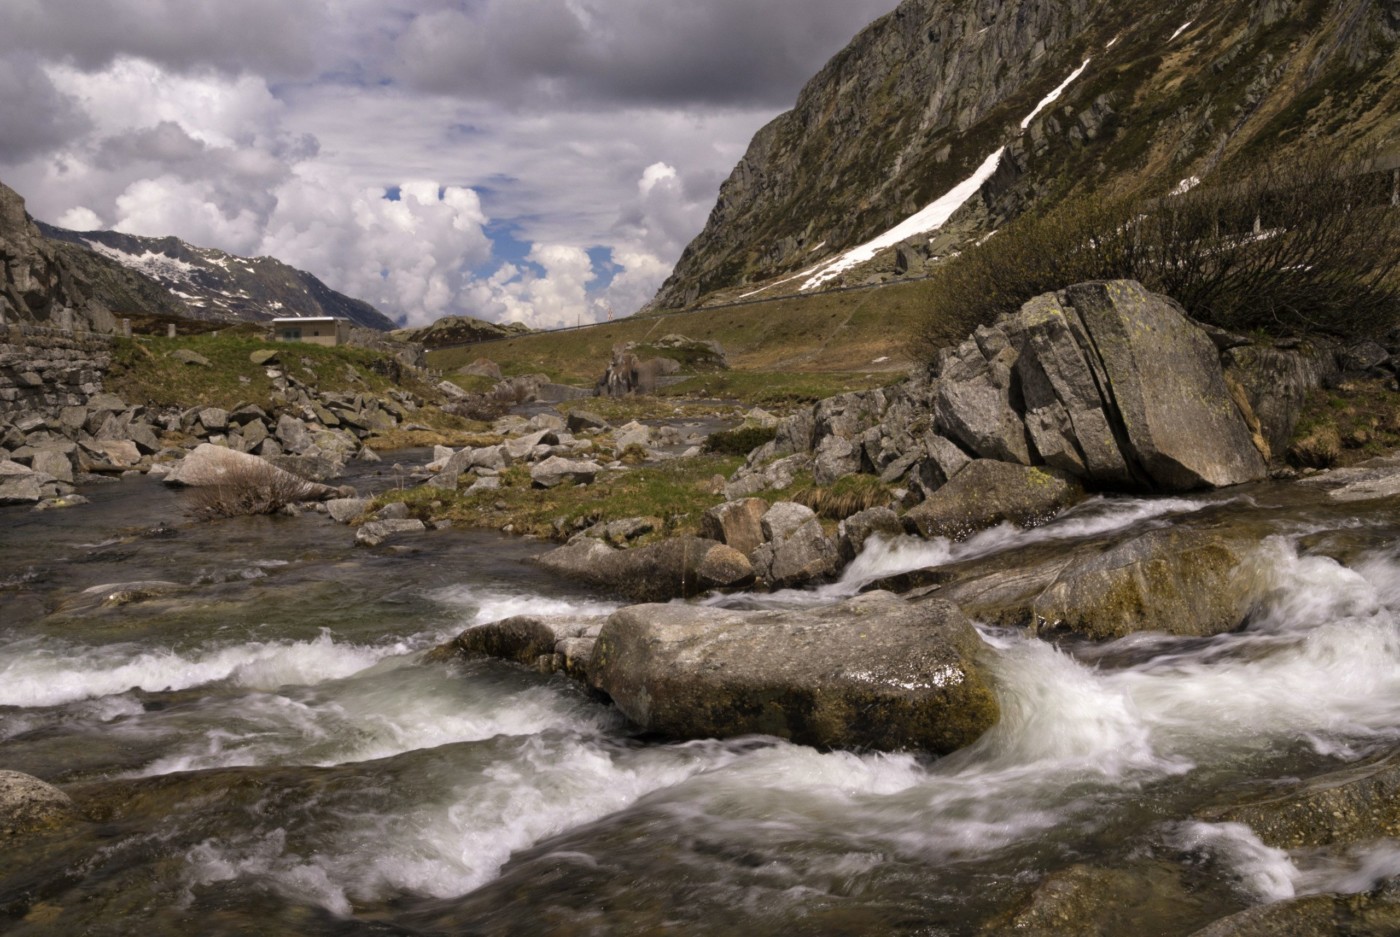 The Gotthard Pass is a mountain pass in the Swiss Alps